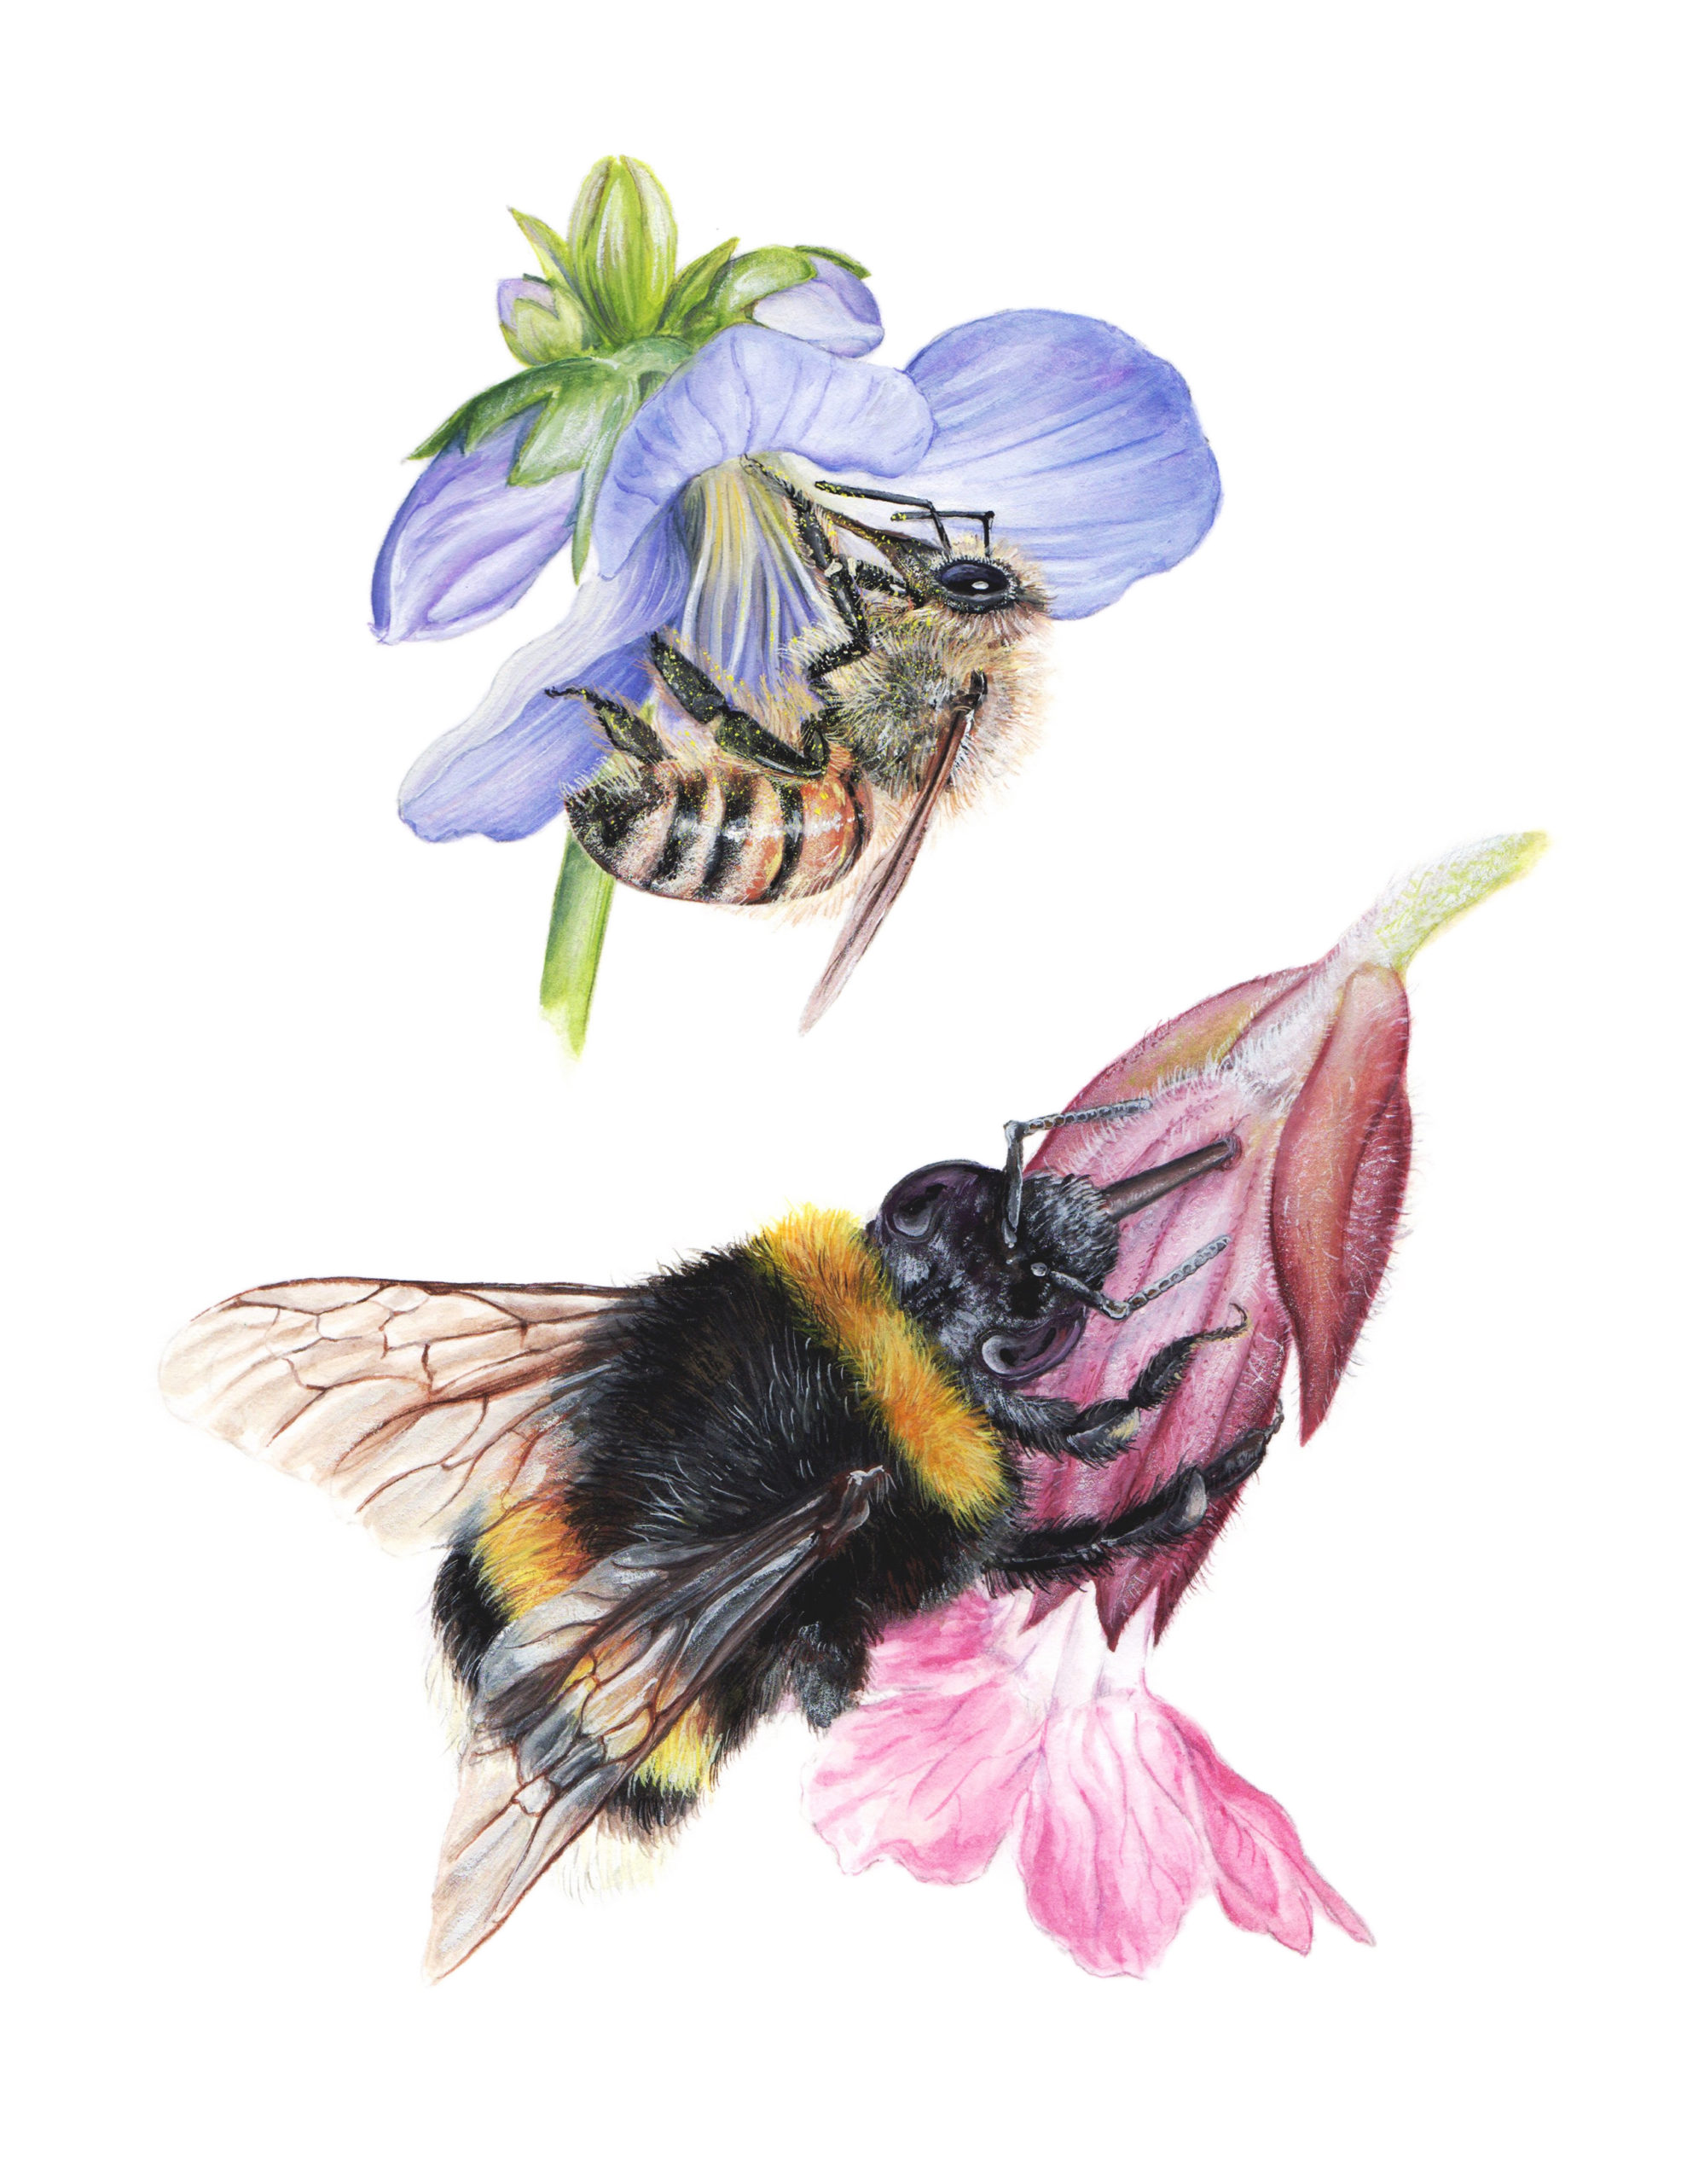 The Robber and the Pollinator by Daisy Chung